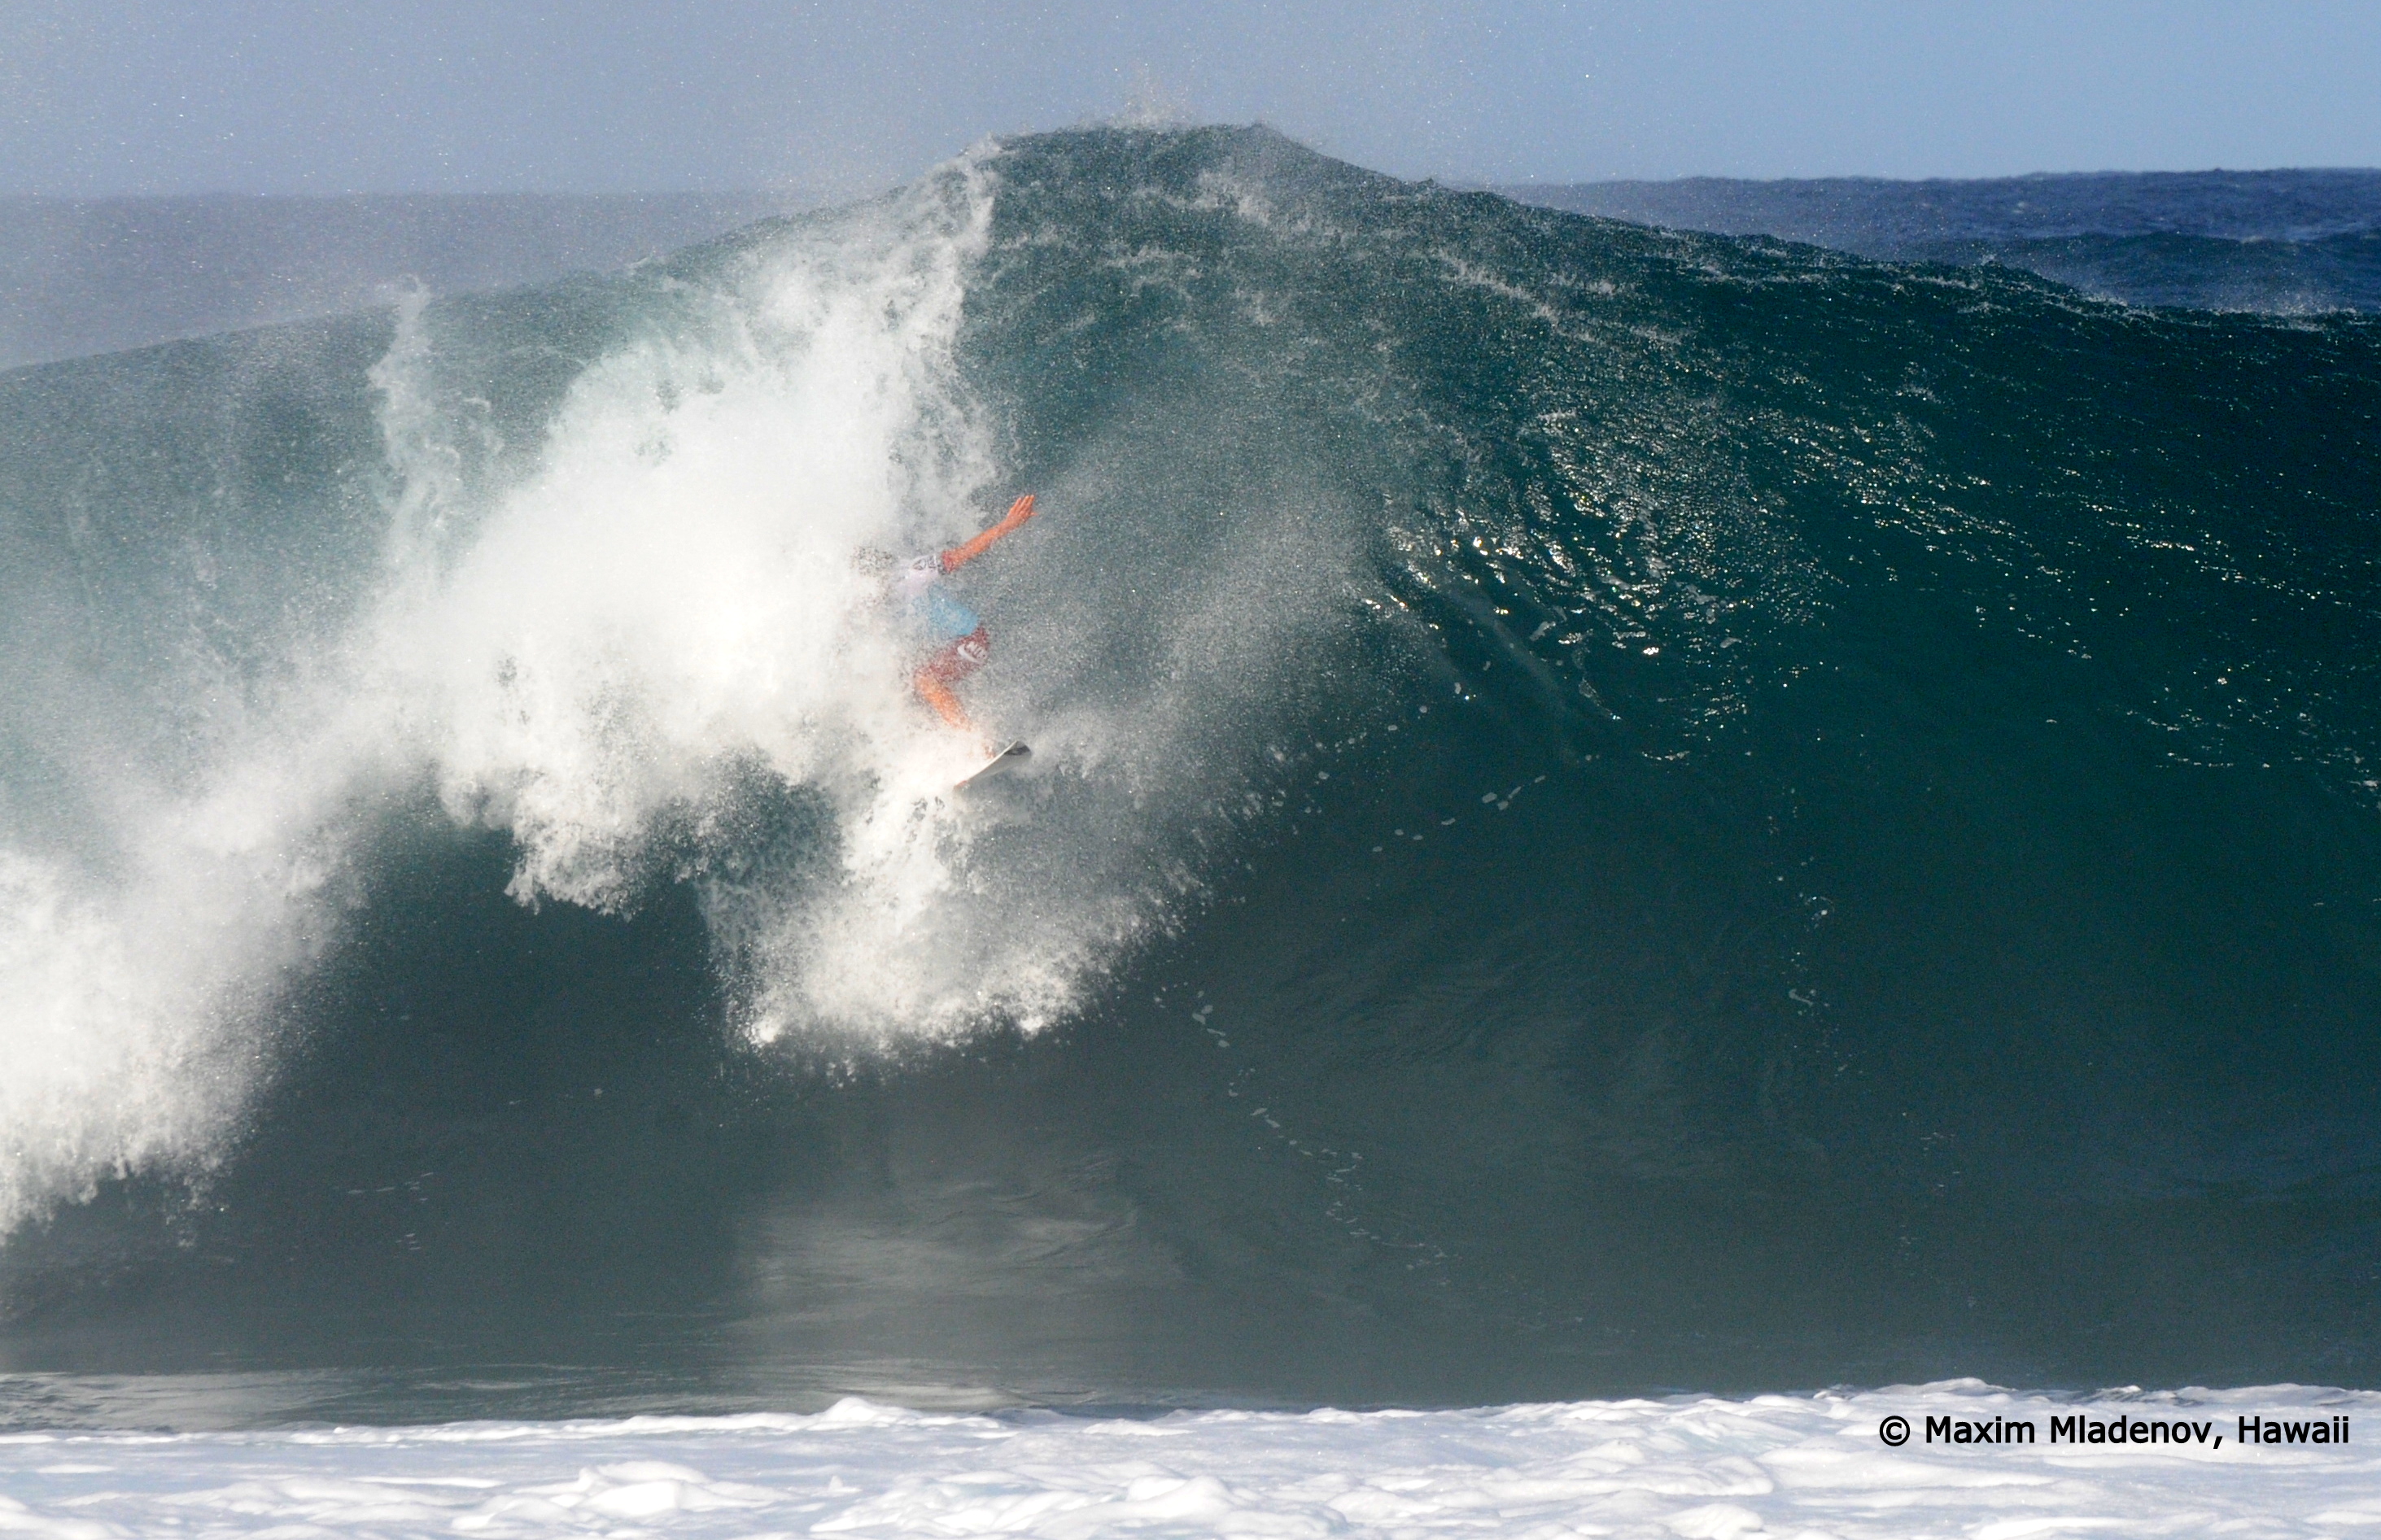 Another wipe-out, 09-12-2011 © Maxim Mladenov, Hawaii